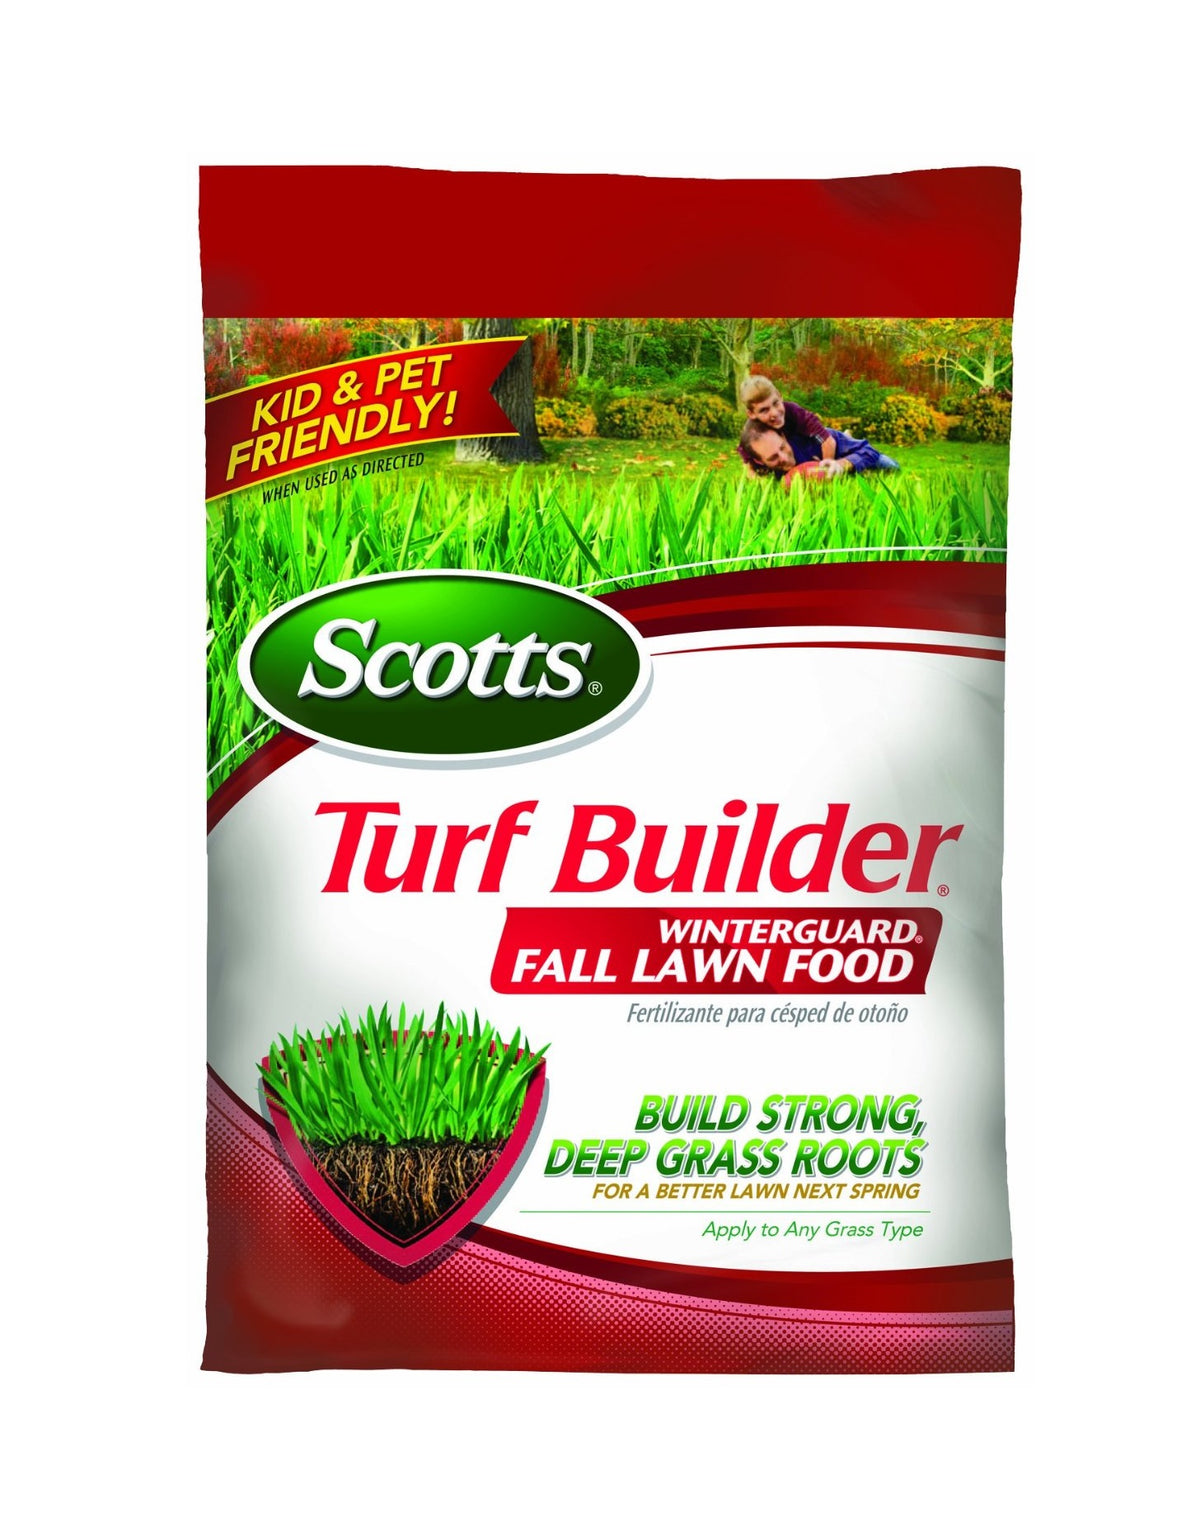 buy turf builders lawn fertilizer at cheap rate in bulk. wholesale & retail lawn & plant insect control store.